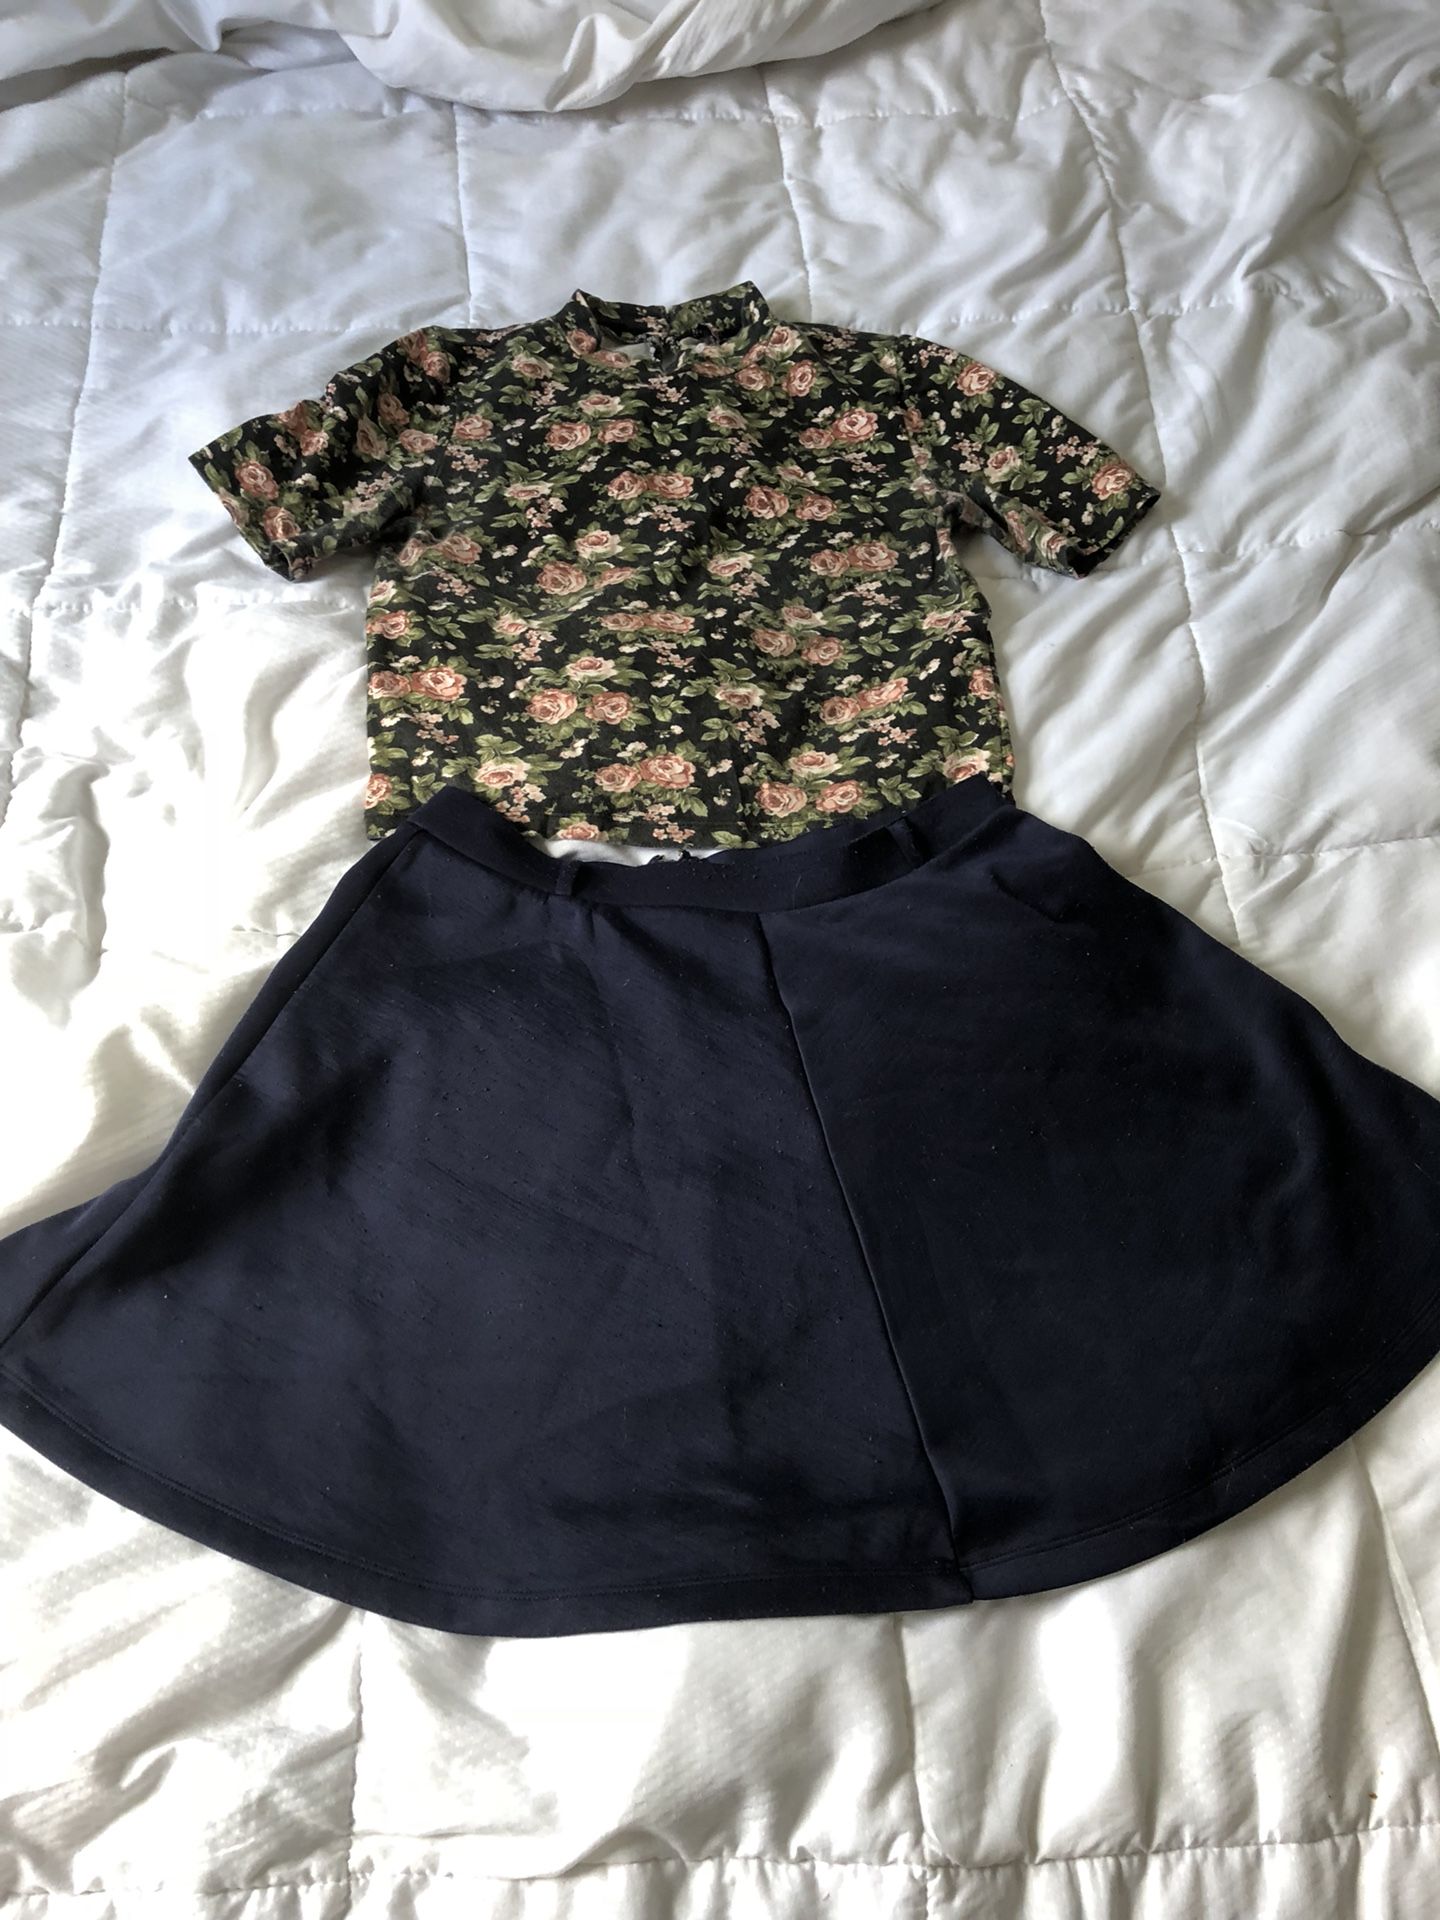 Juniors/women’s size M - Forever 21 - 7 skirts and 1 top